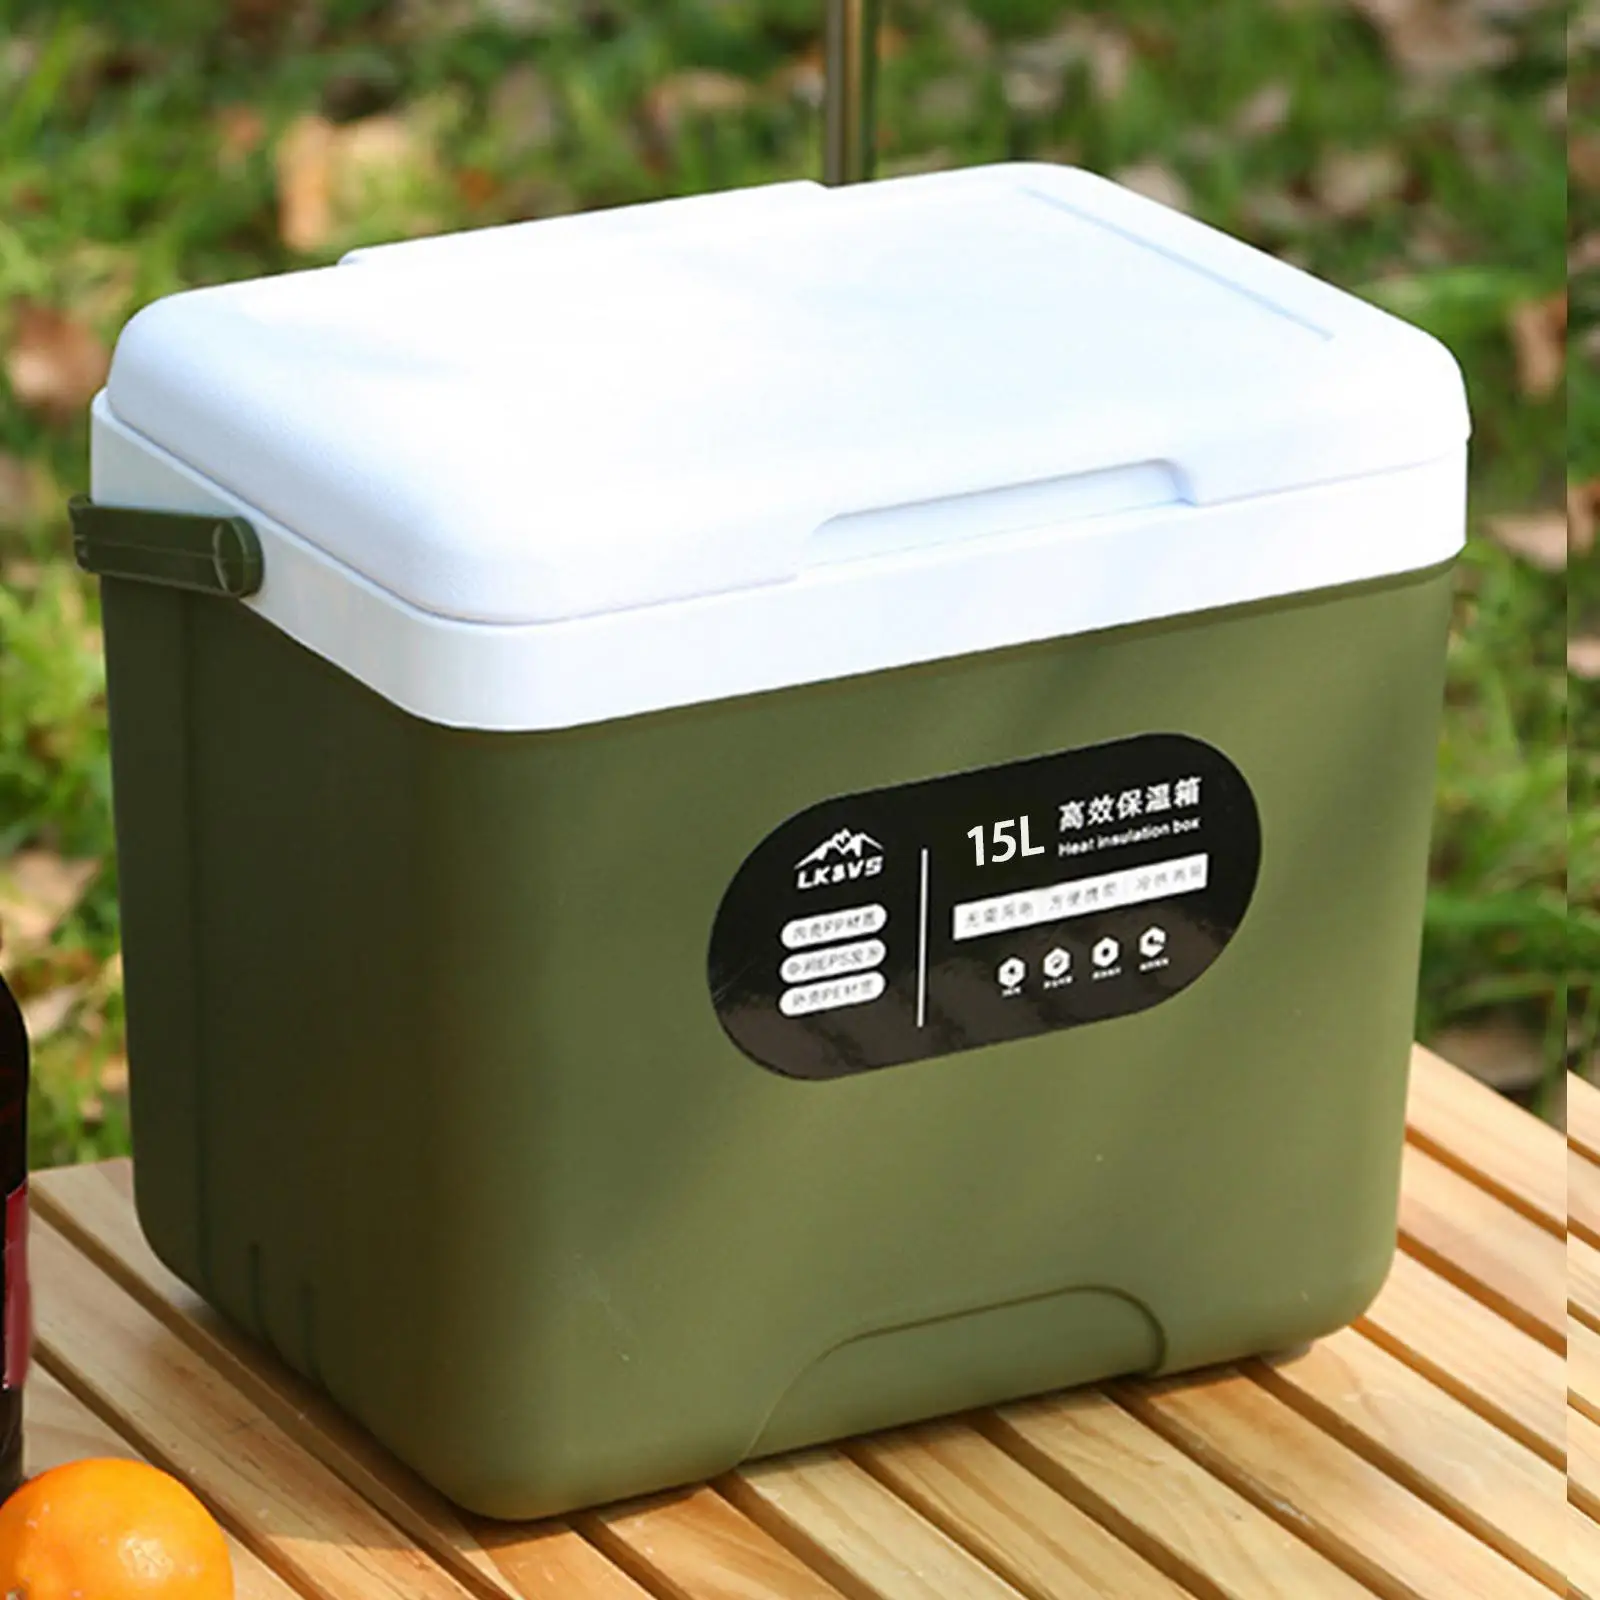 Durable Car Refrigerator Cooler Multifunction Mini Fridge Freezer Box Ice Bucket for Car Barbecue Office Household Camping